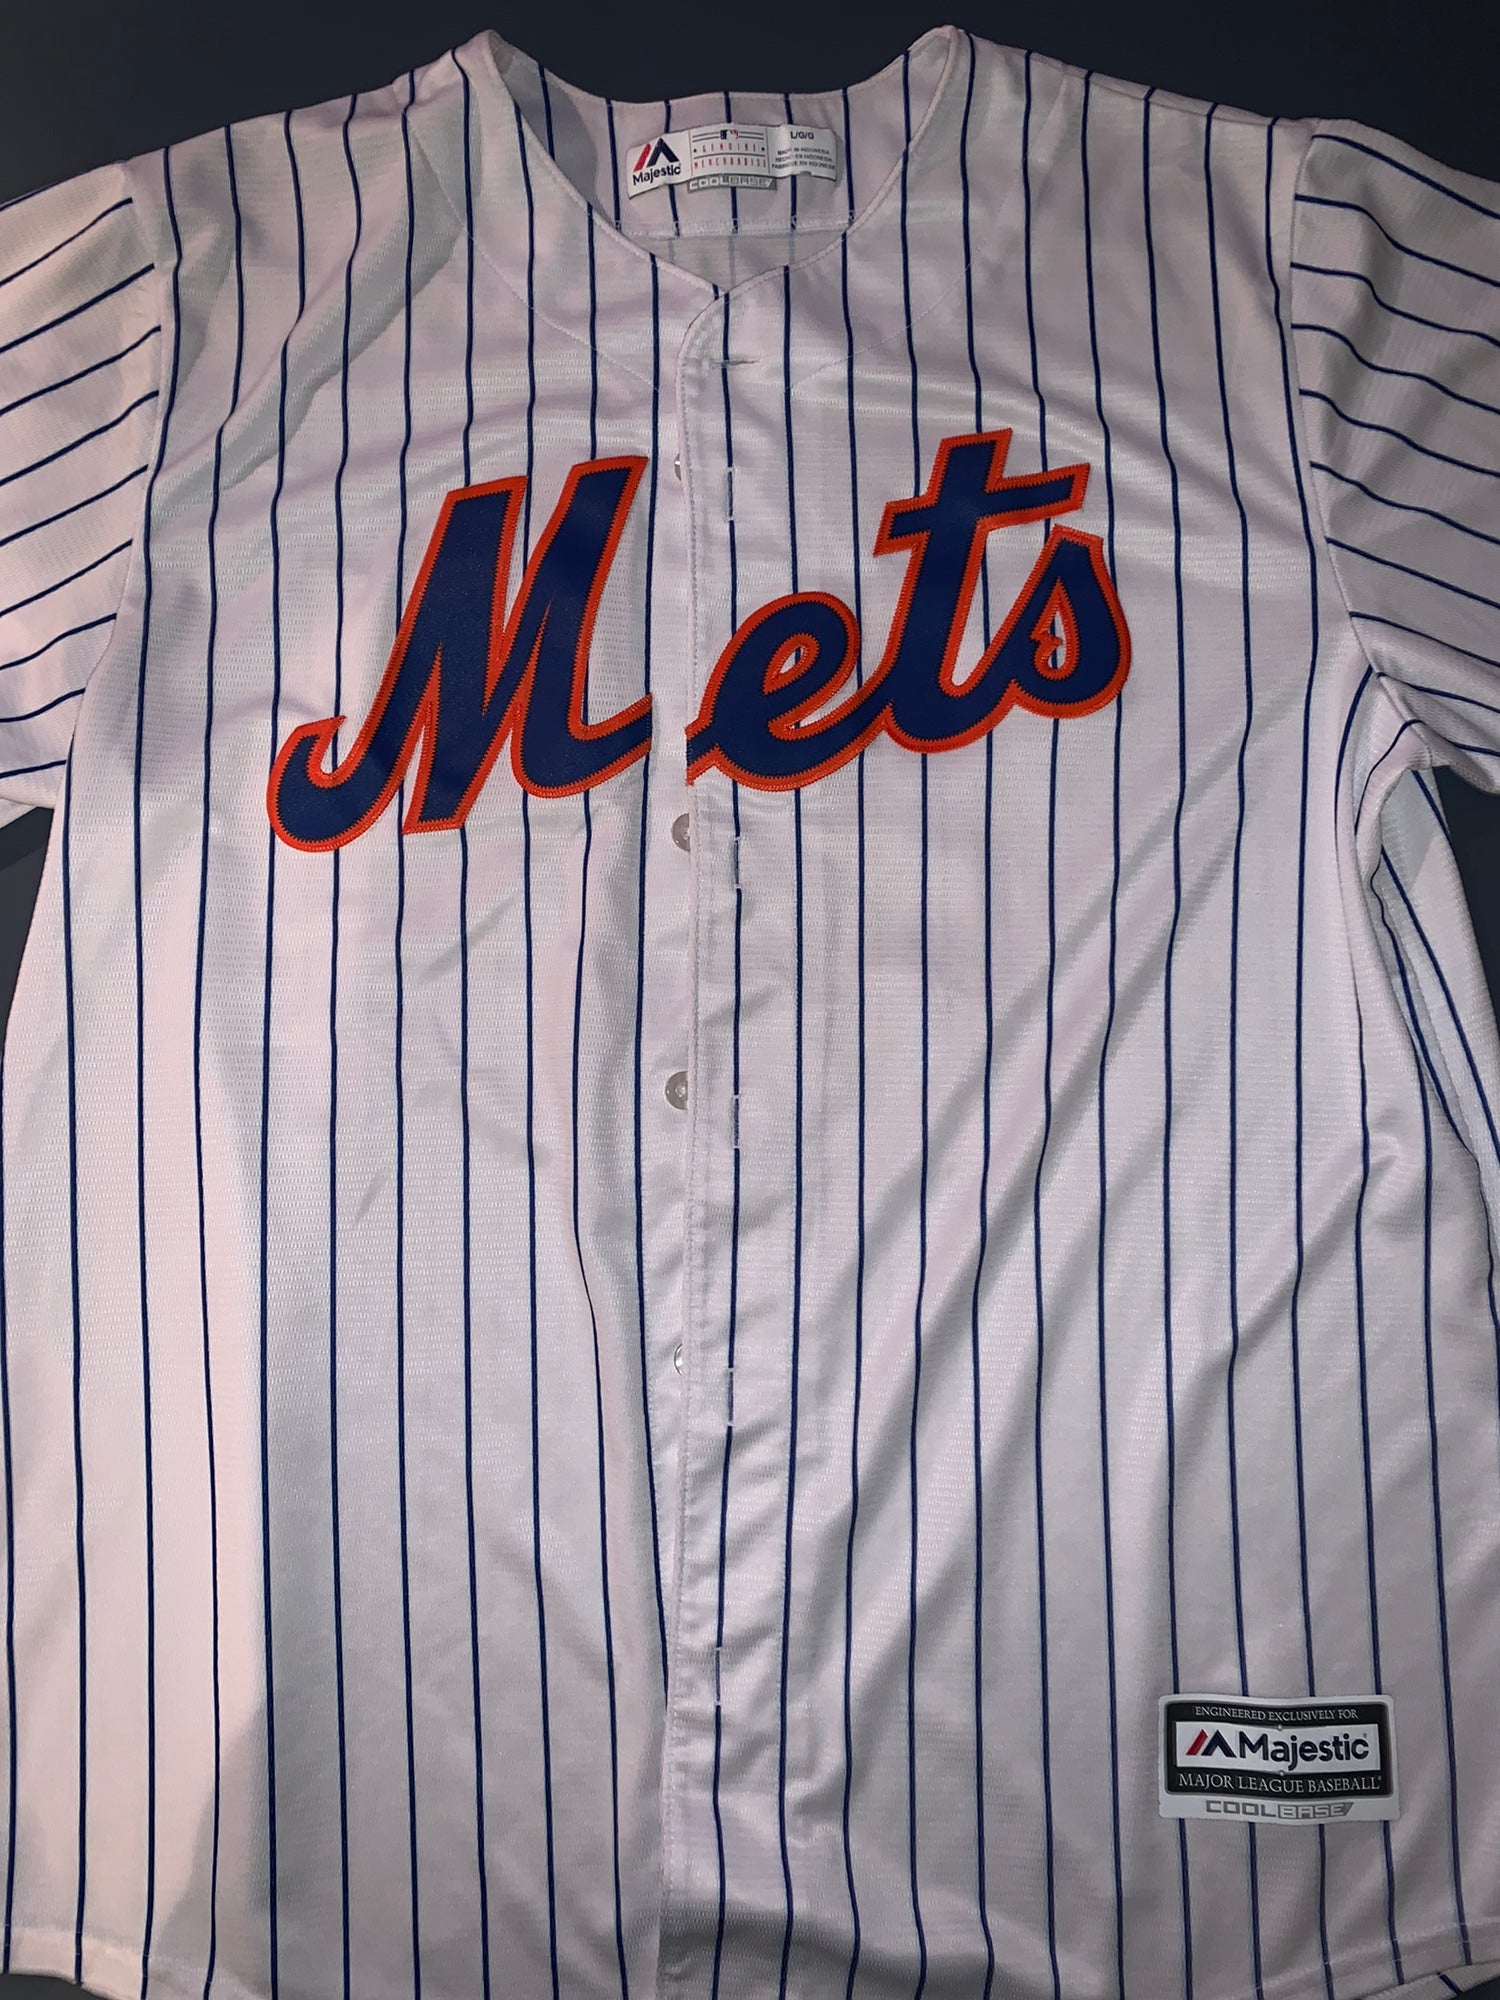 tim tebow mets jersey